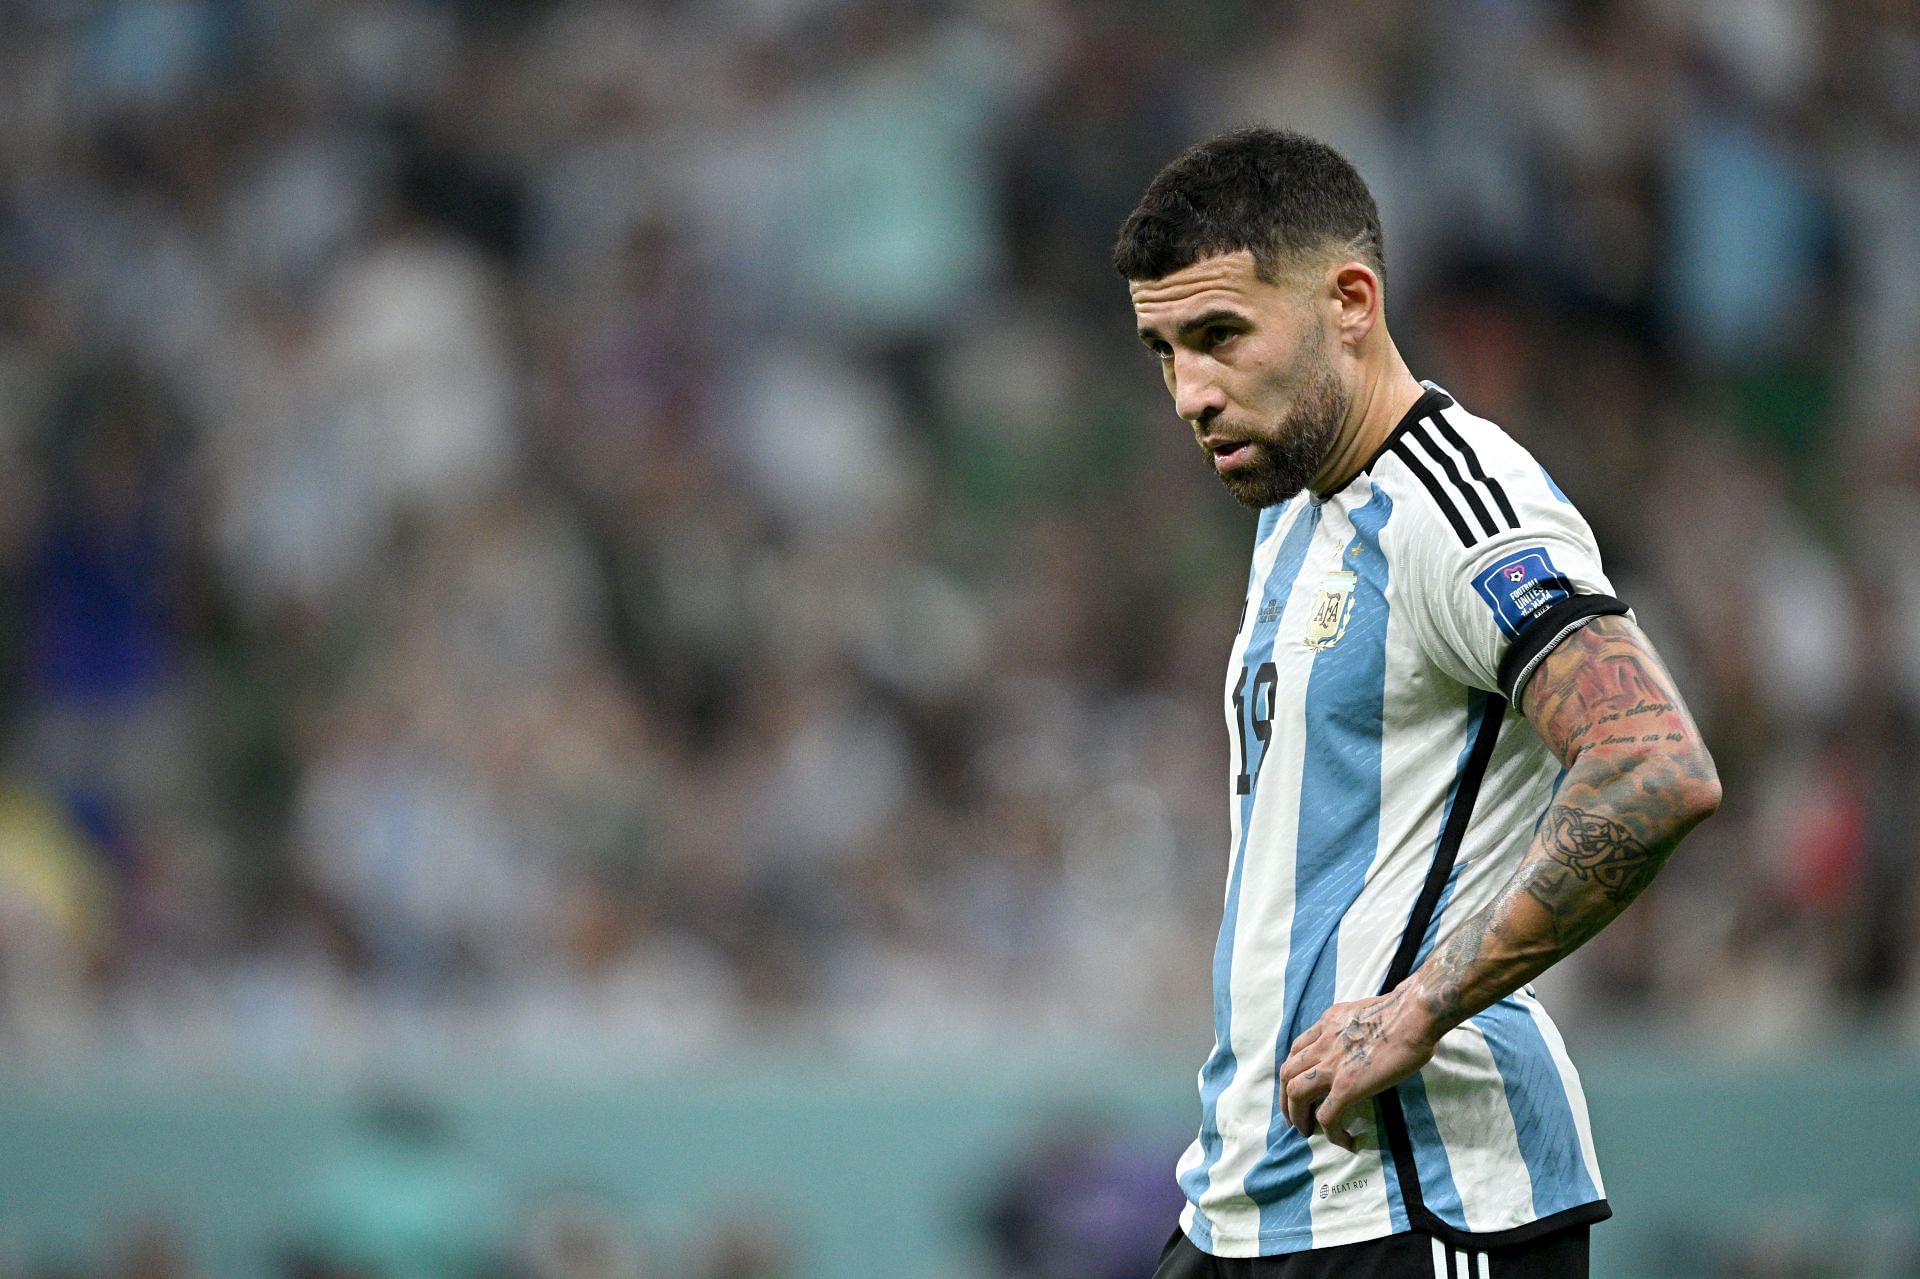 Nicolas Otamendi was largely solid for Argentina, though he did have his occasional lapses